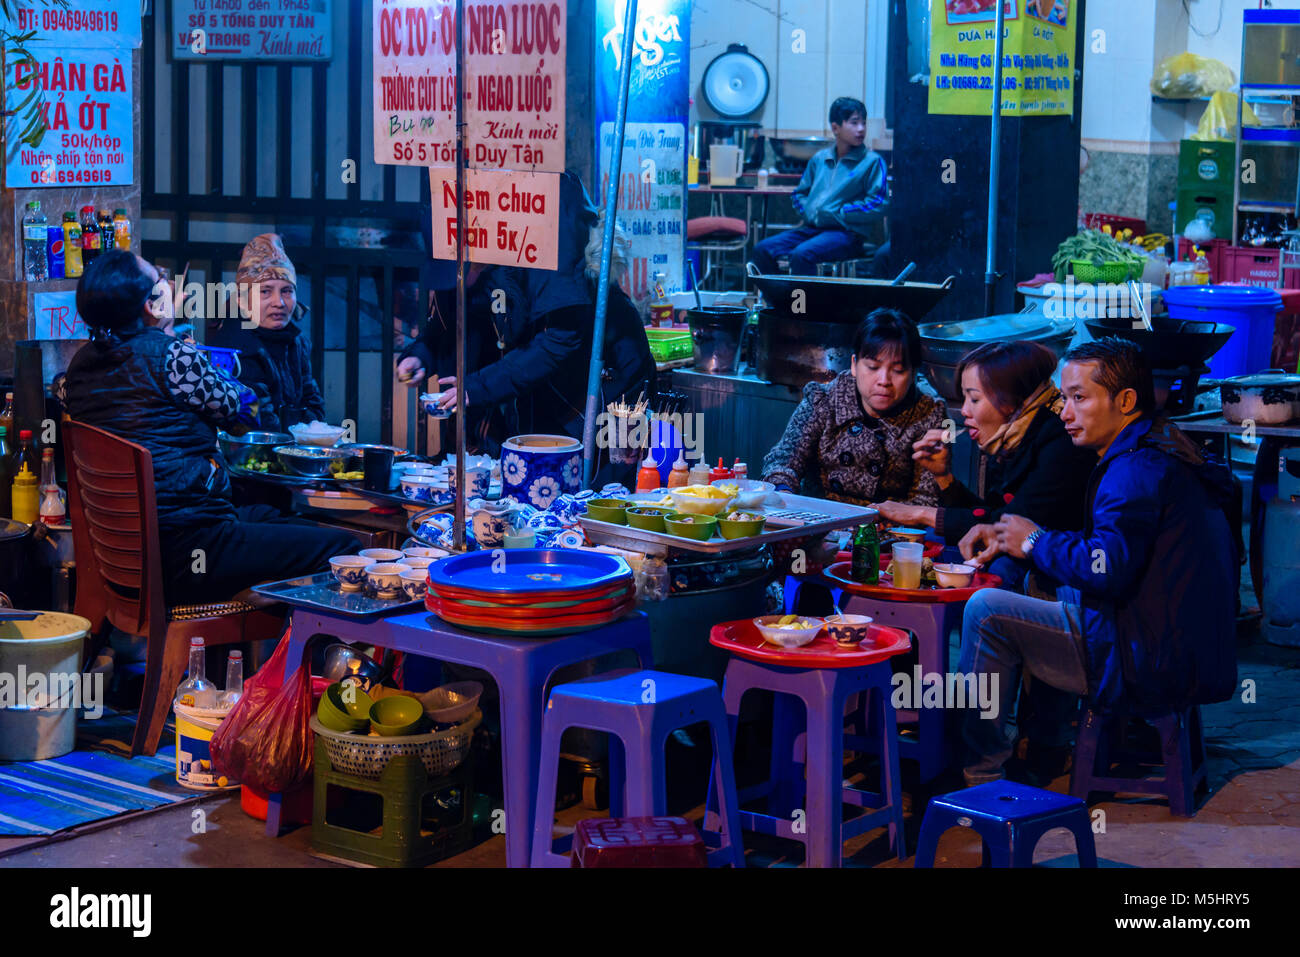 Men eating at a traditional Vietnamese street food pop-up cafe in Hanoi, Vietnam. Stock Photo